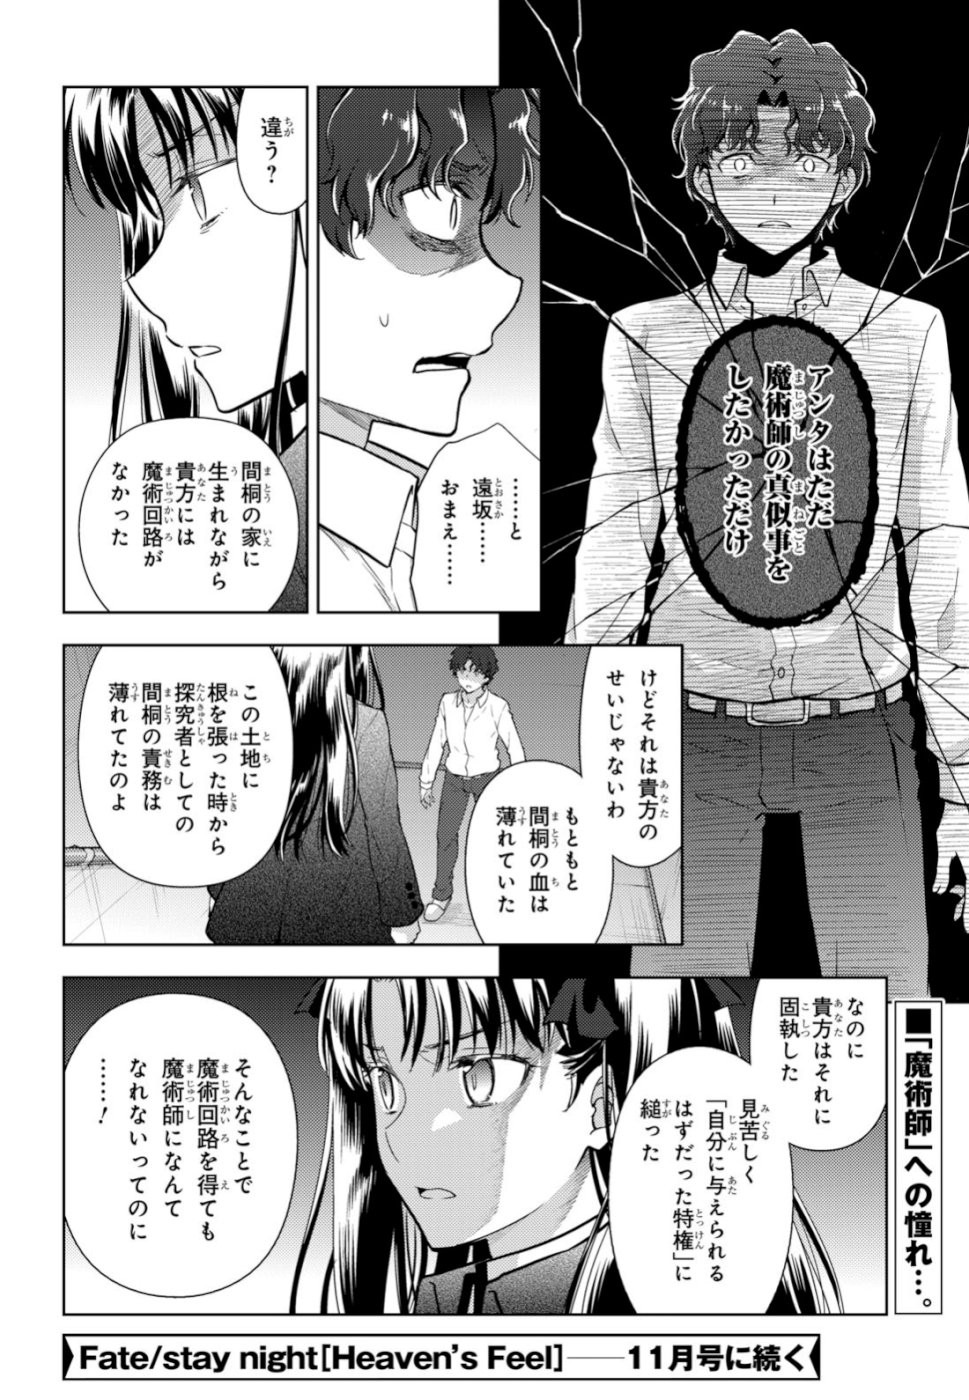 Fate/Stay night Heaven's Feel - Chapter 51 - Page 13